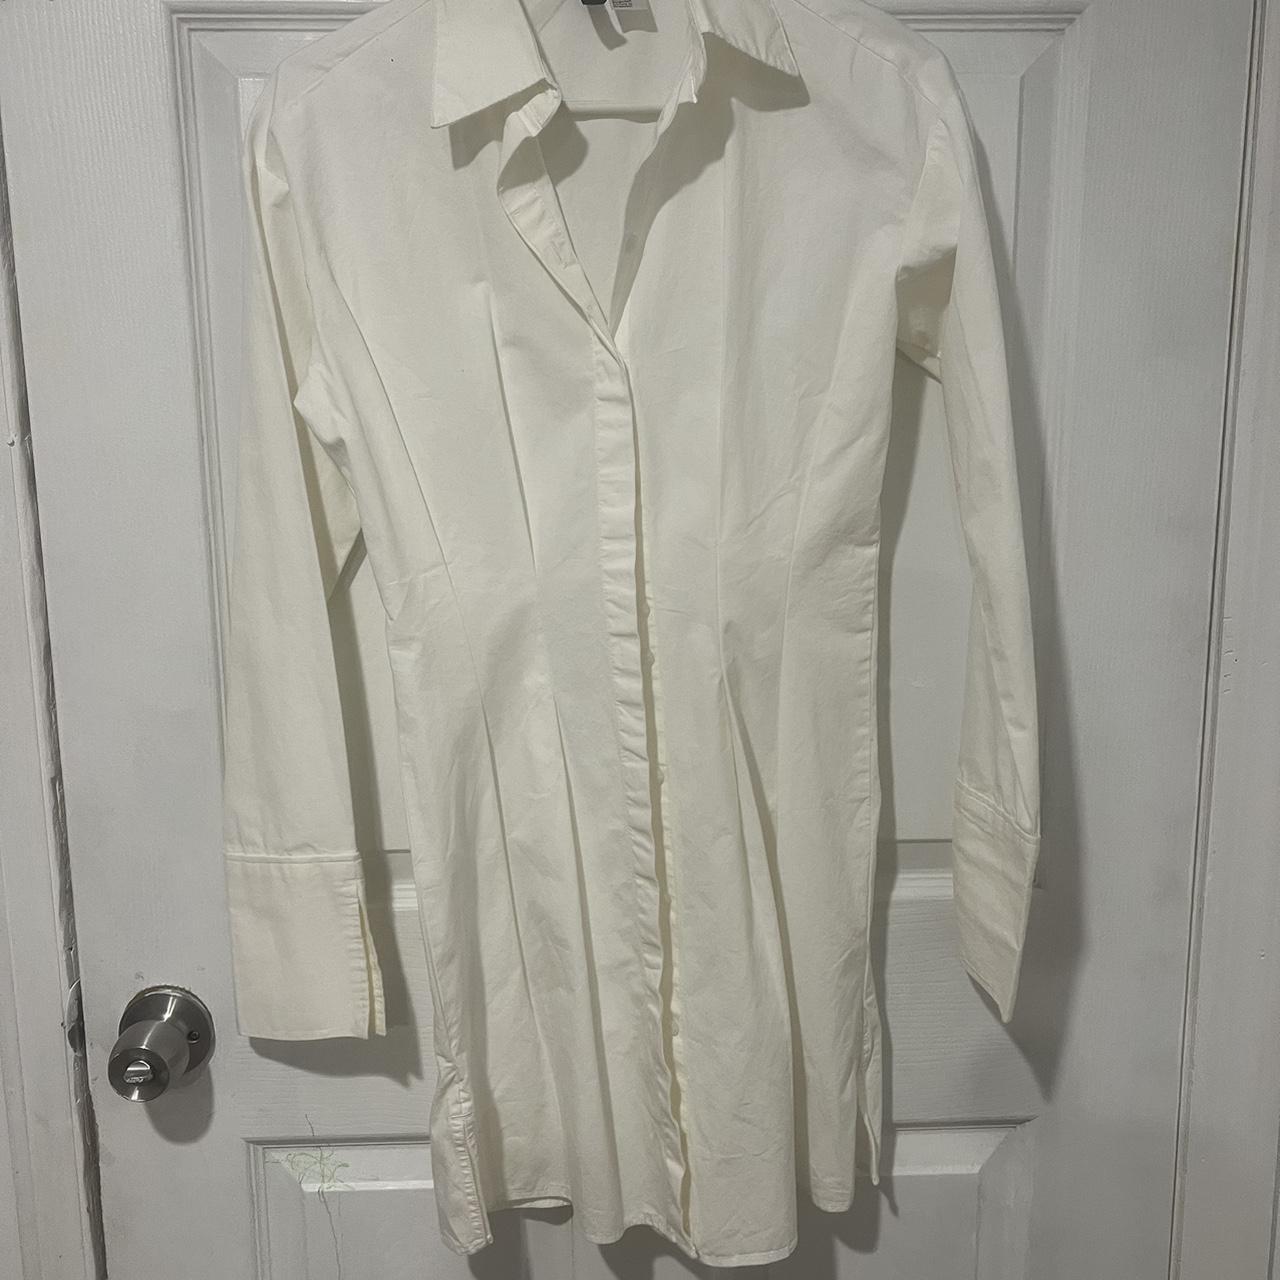 White H&M shirt dress! Never worn but doesn’t have... - Depop